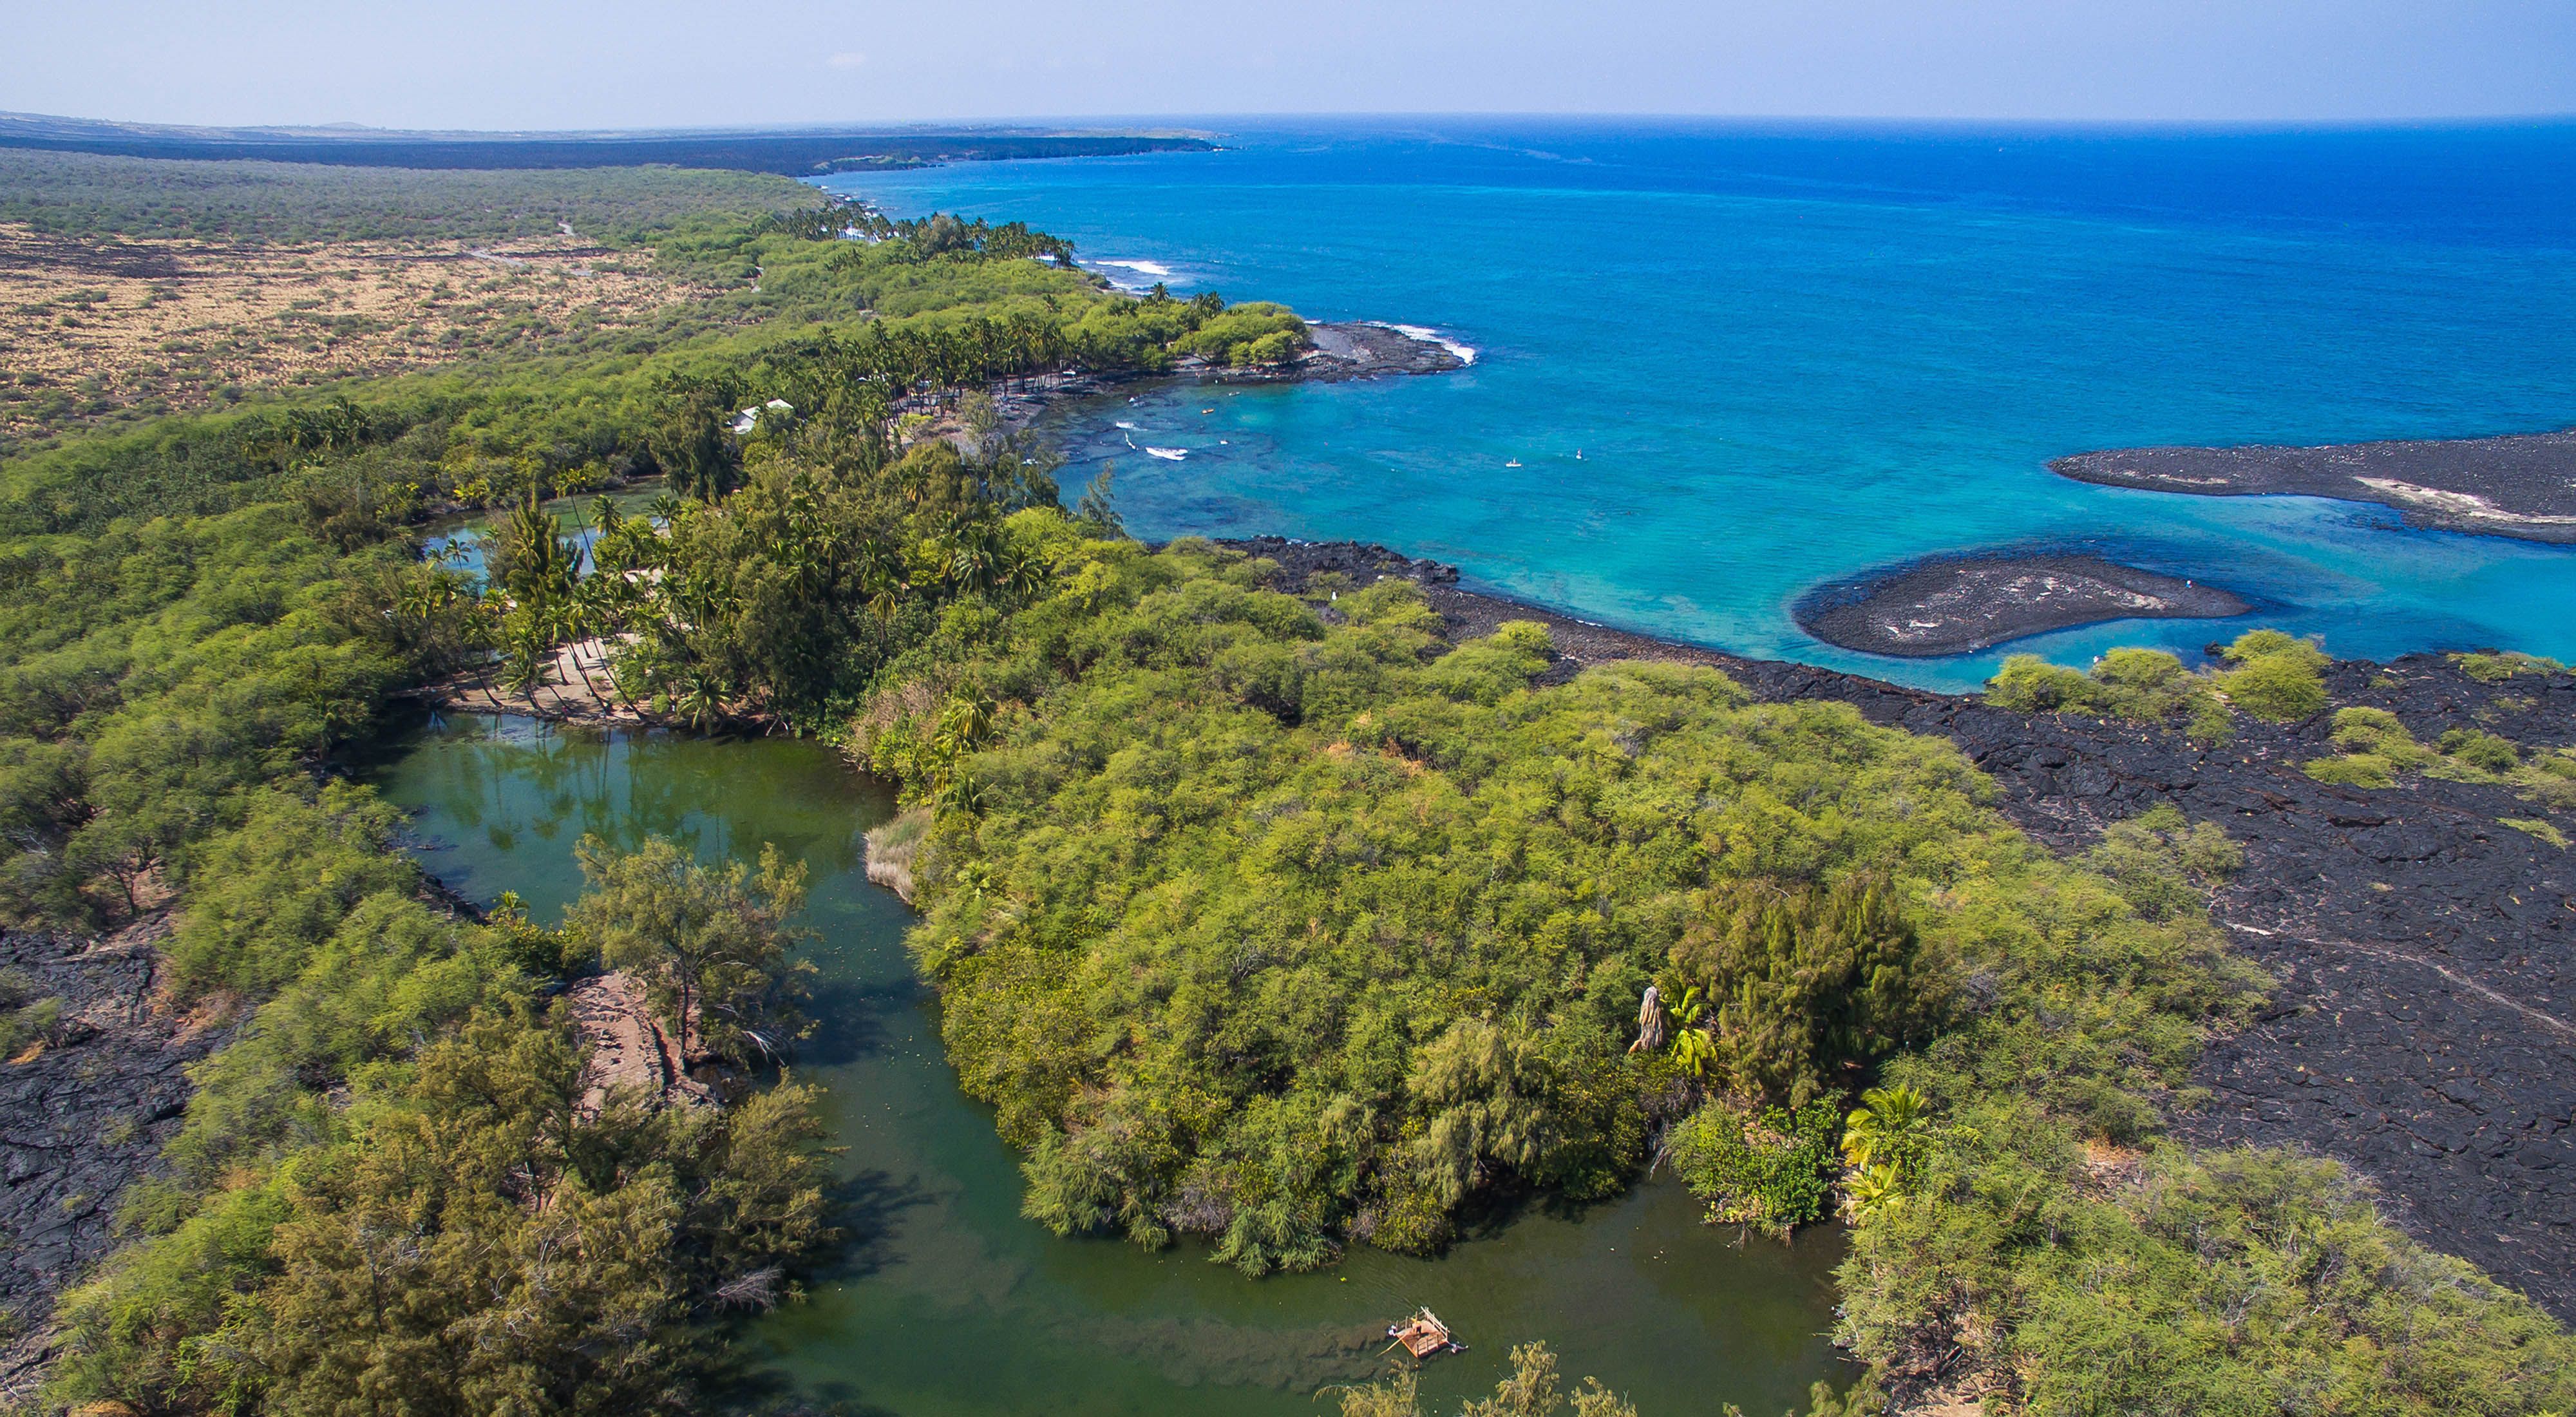 Aerial view of a fishpond surrounded by woodland next to a coastline and deep blue ocean.